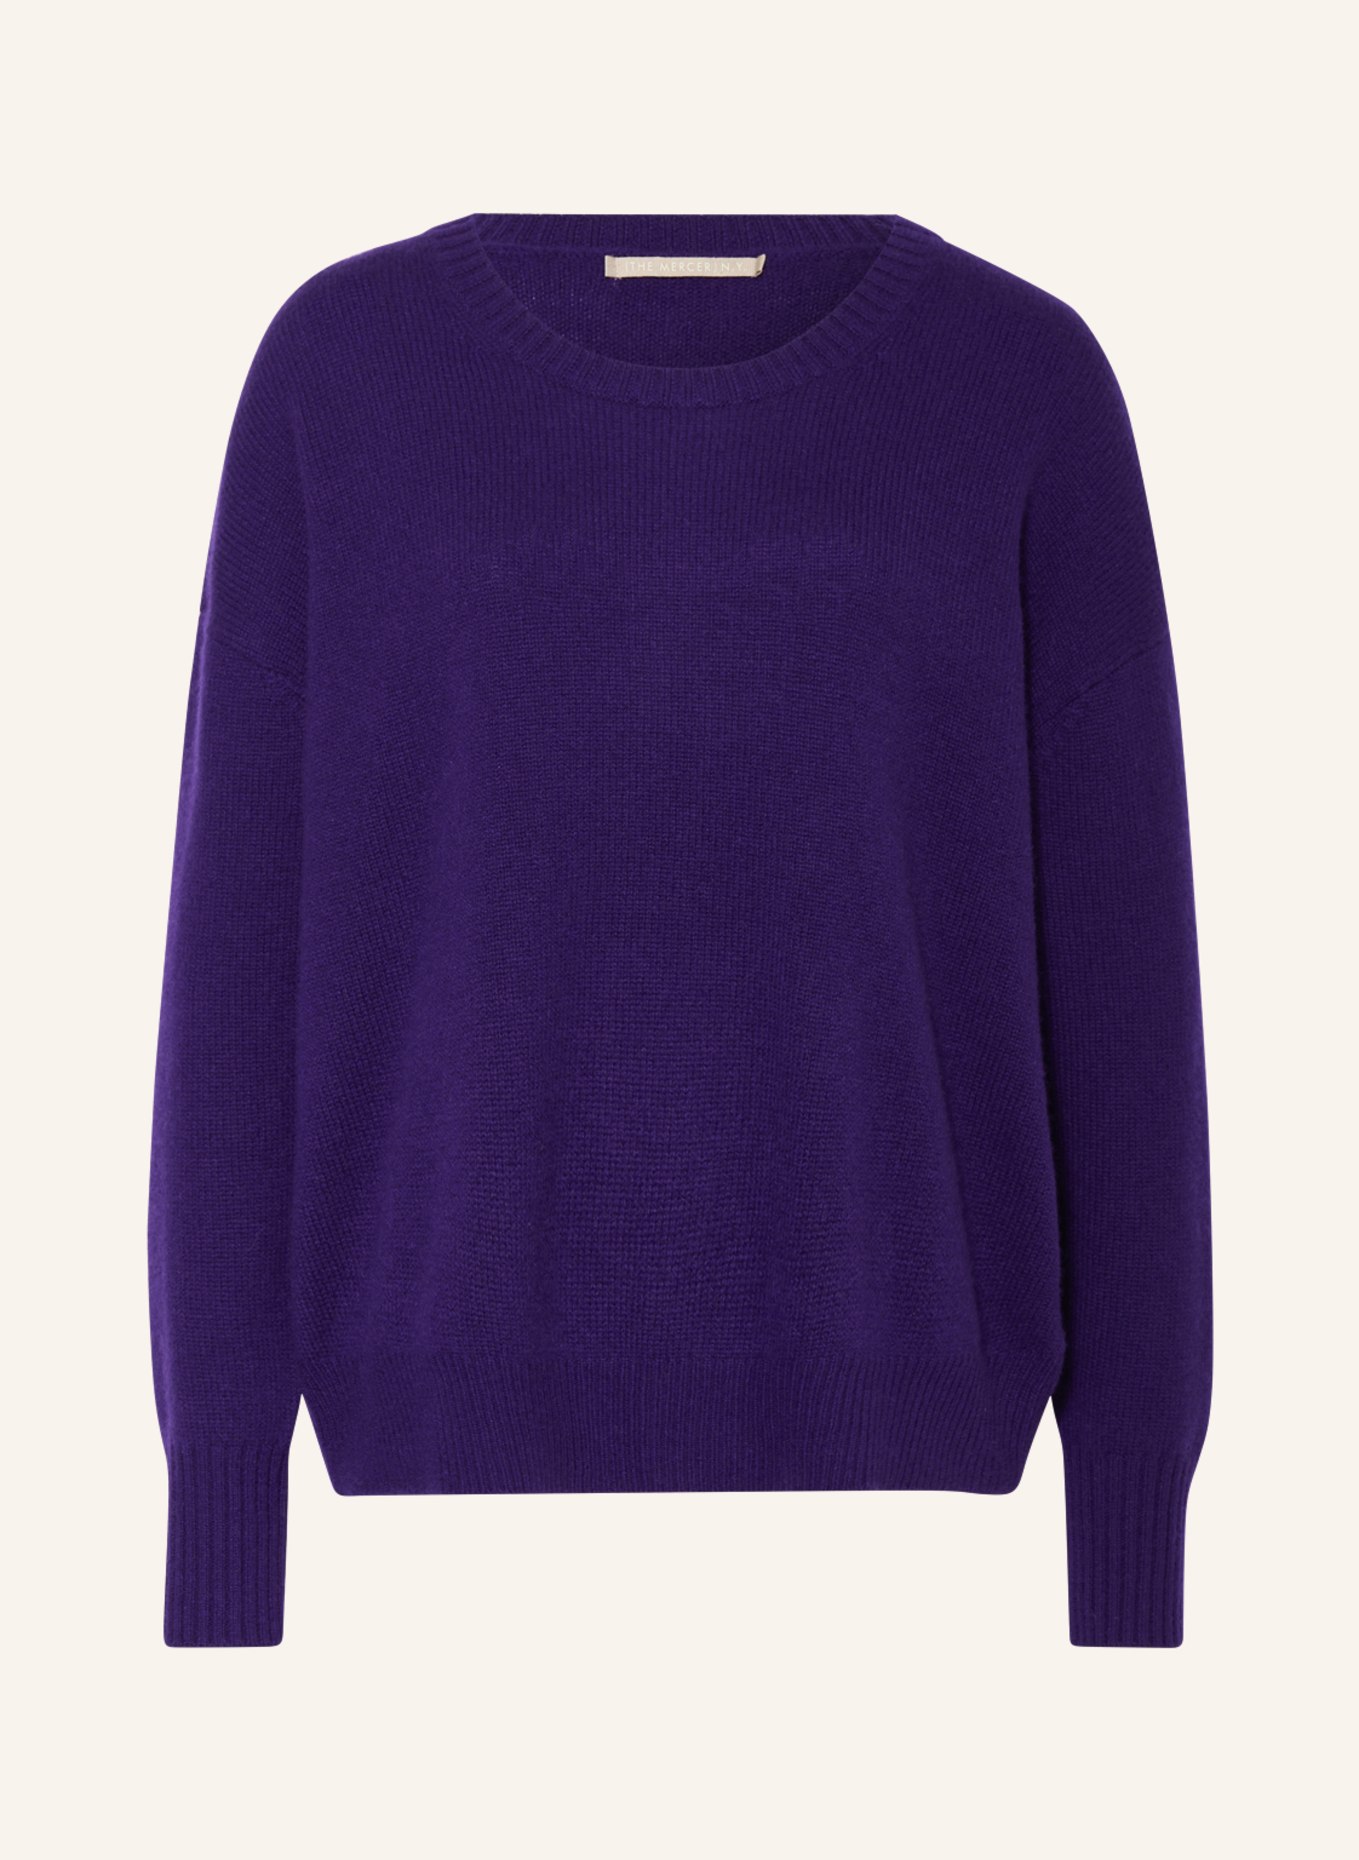 (THE MERCER) N.Y. Cashmere sweater, Color: PURPLE (Image 1)